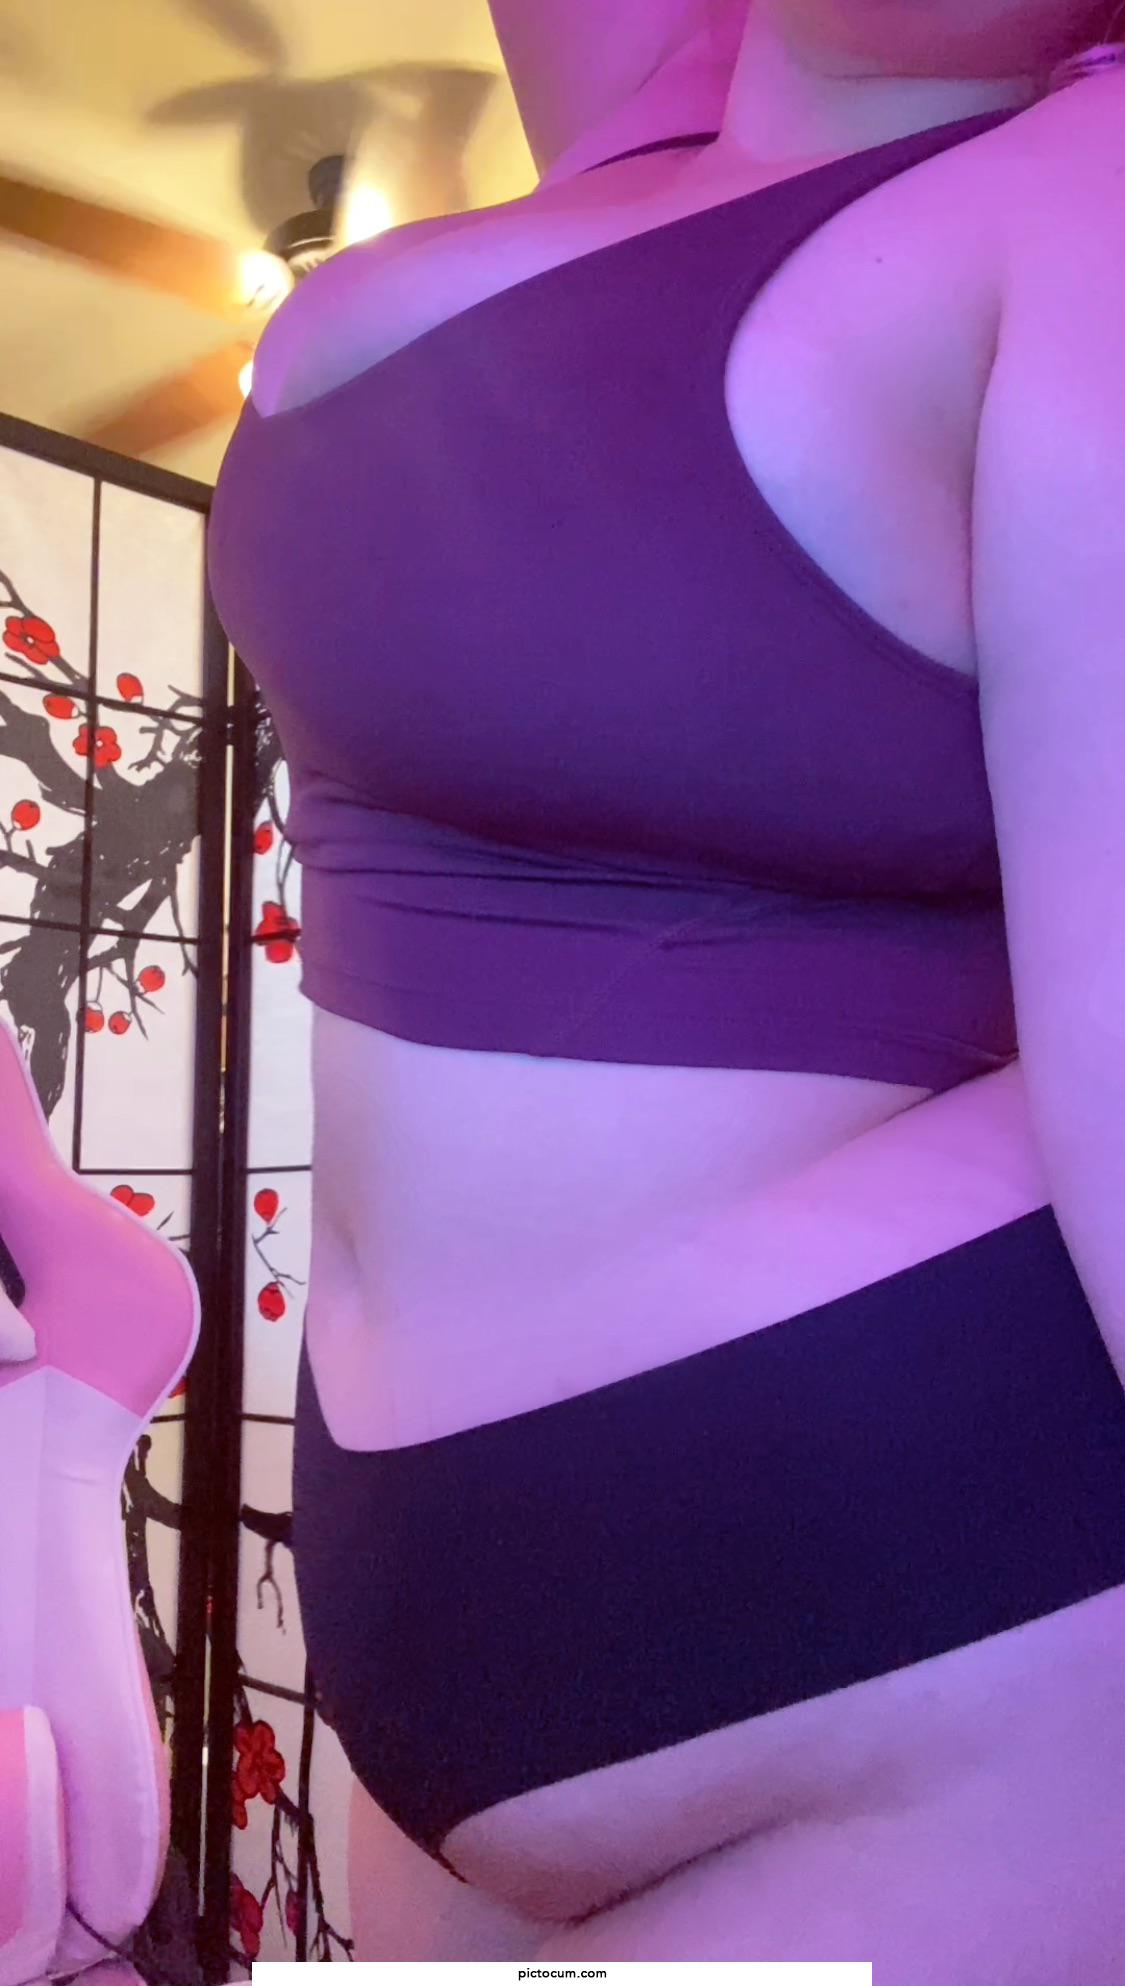 I was playing video games and realized my boobs look really good in this top lol